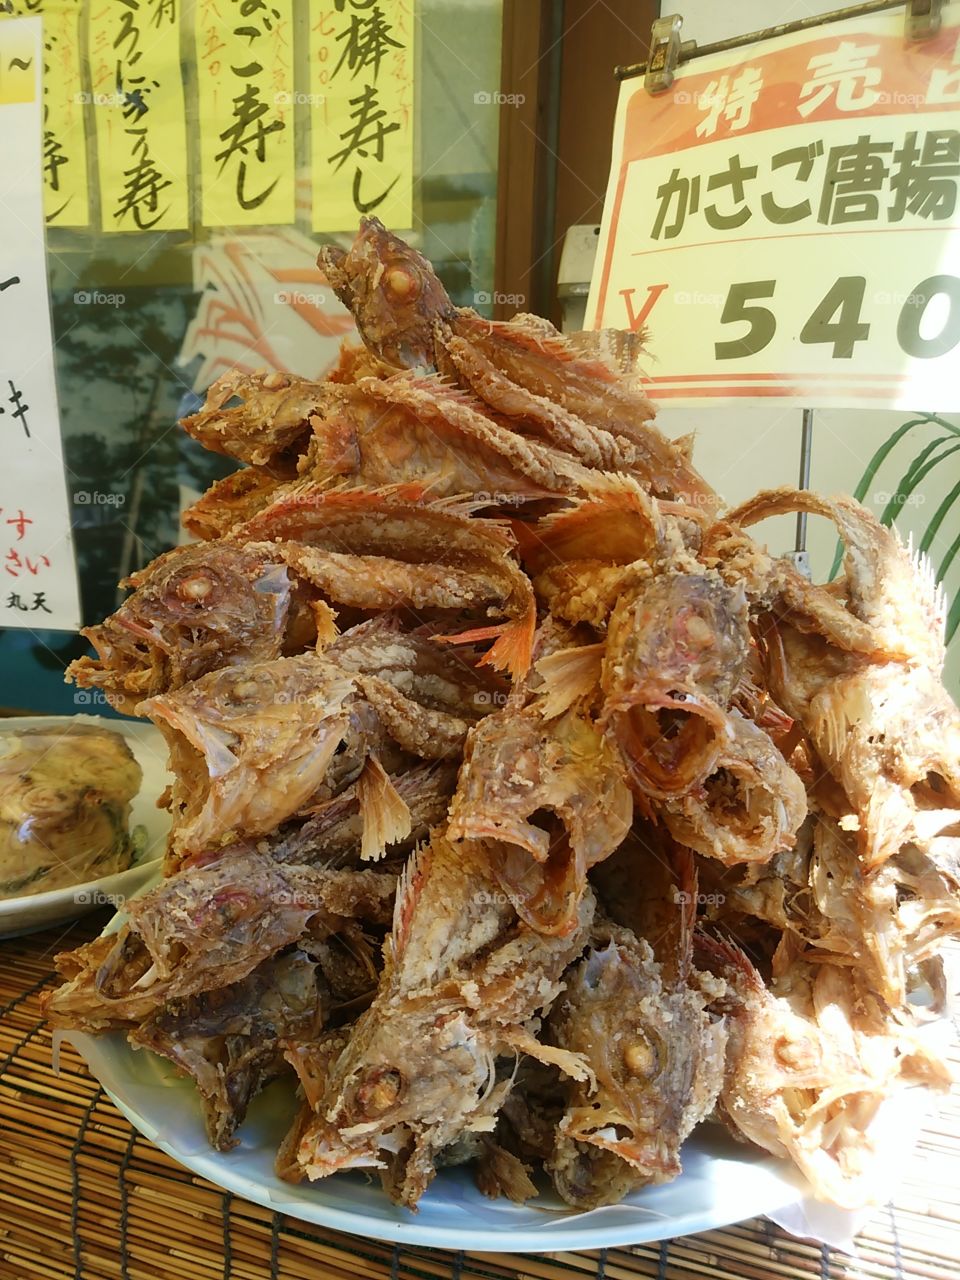 Kasago 
it looks like a Gozira!!
be careful when you eat this. lol